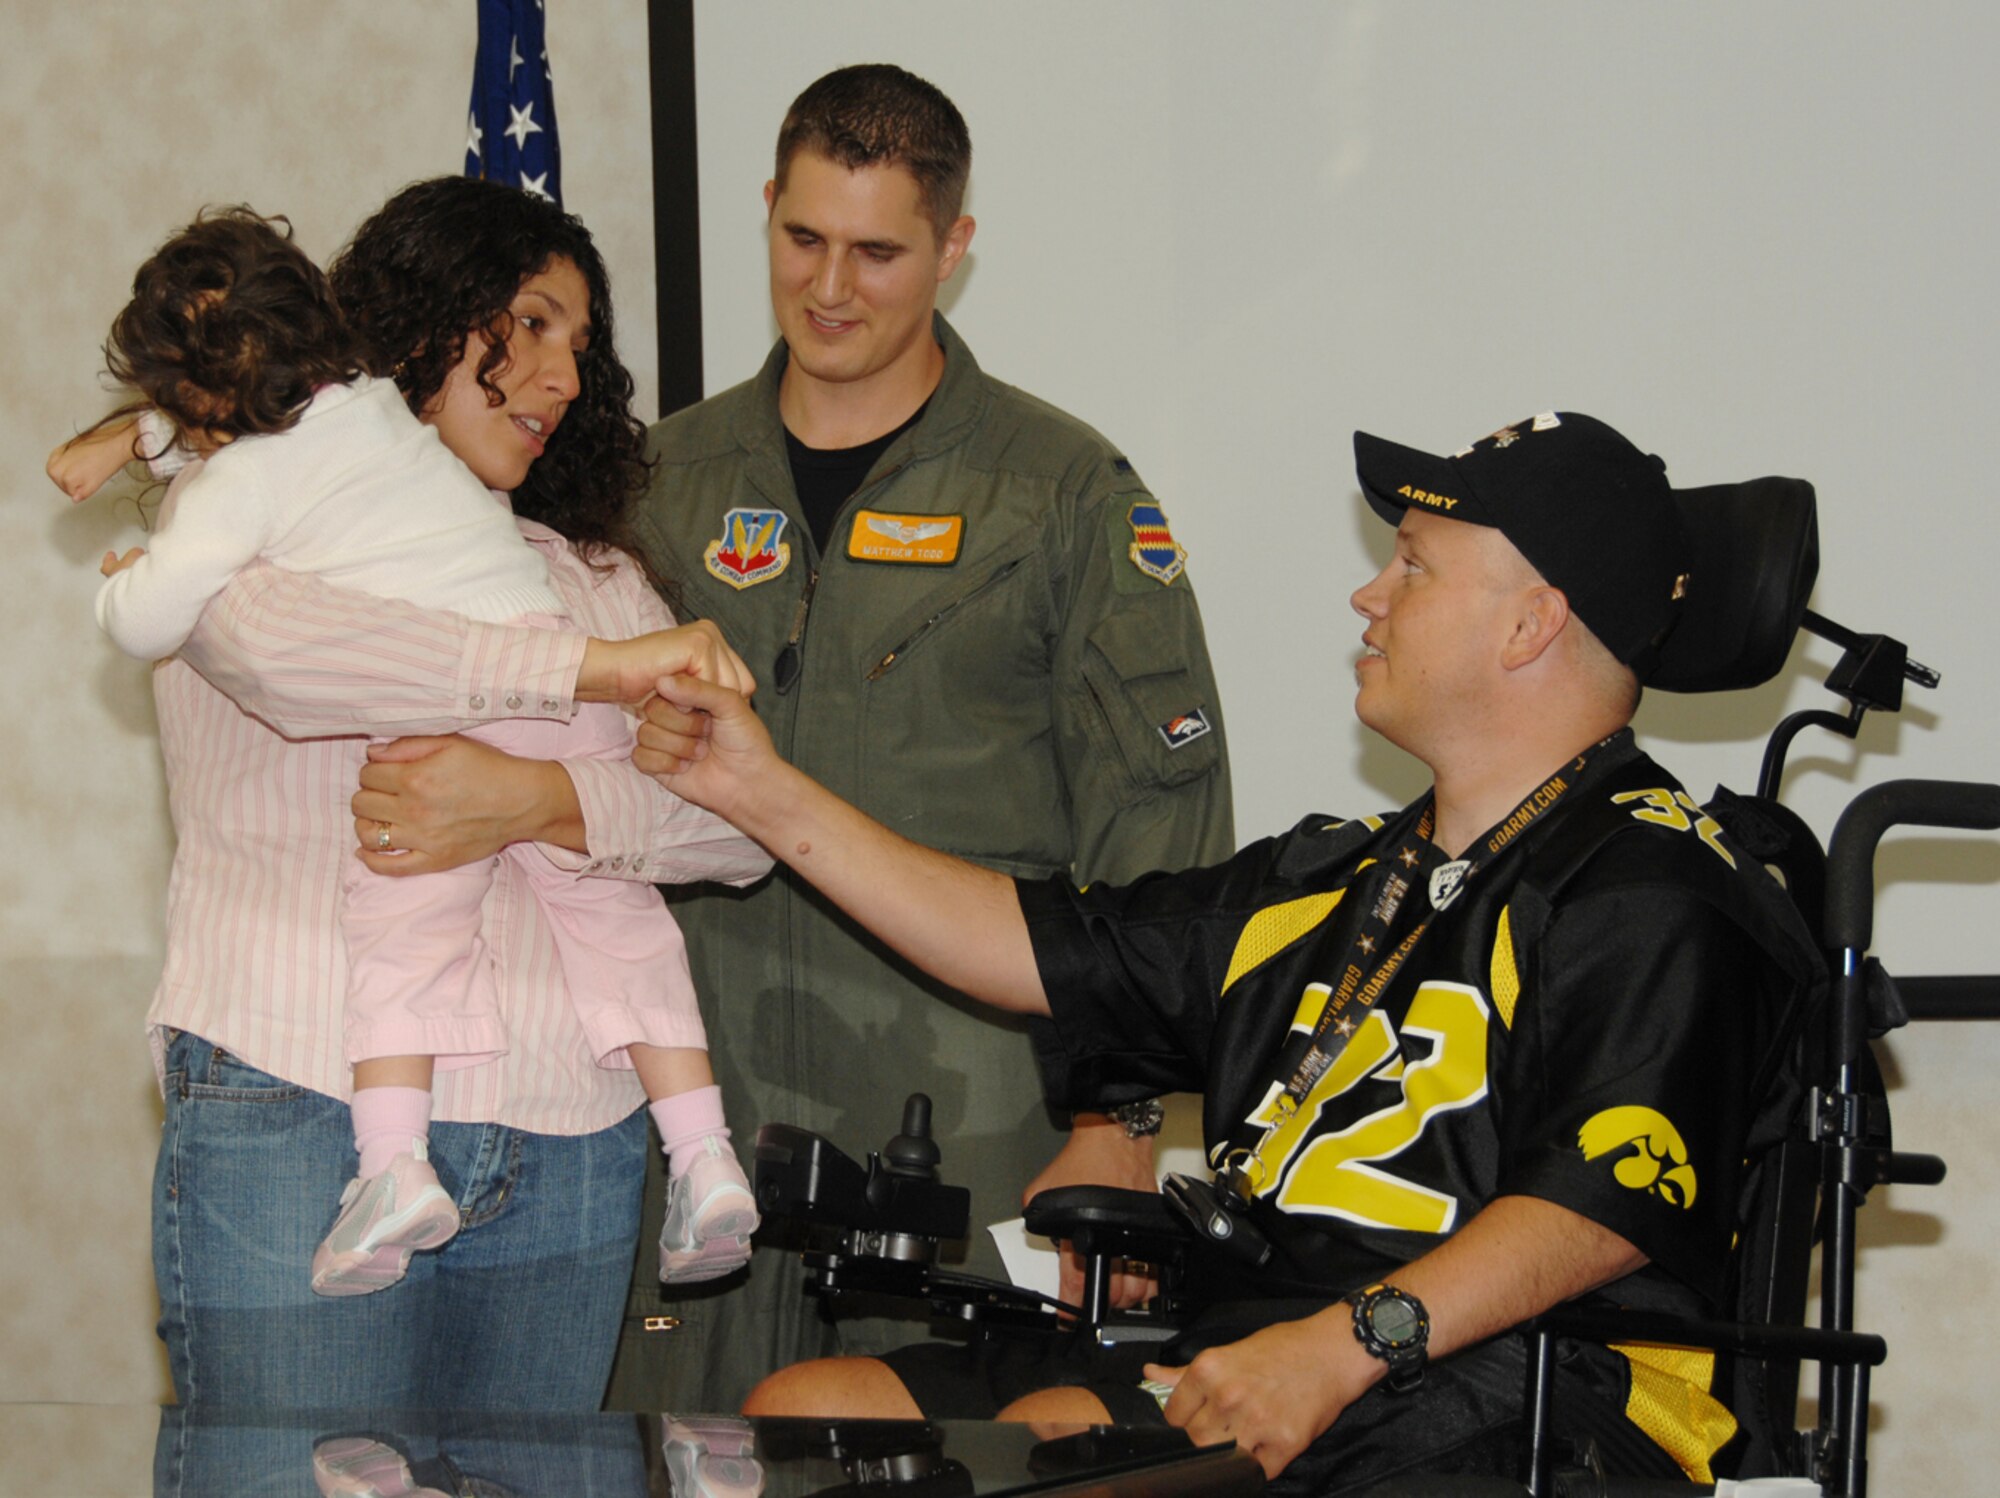 Monica Todd, her husband 1st Lt. Matthew Todd and daughter Lorilei, a special needs child, meet John Weinburgh, a disabled Army veteran, during a special ceremony recently. Both the Todd family and Mr. Weinburgh received donation from the Bellevue Chapter of the American Veterans Motorcycle Club. The AVMC raises money each year through a poker run to donate to military members and their families facing hardships. (U.S. Air Force Photo By Kendra Williams)